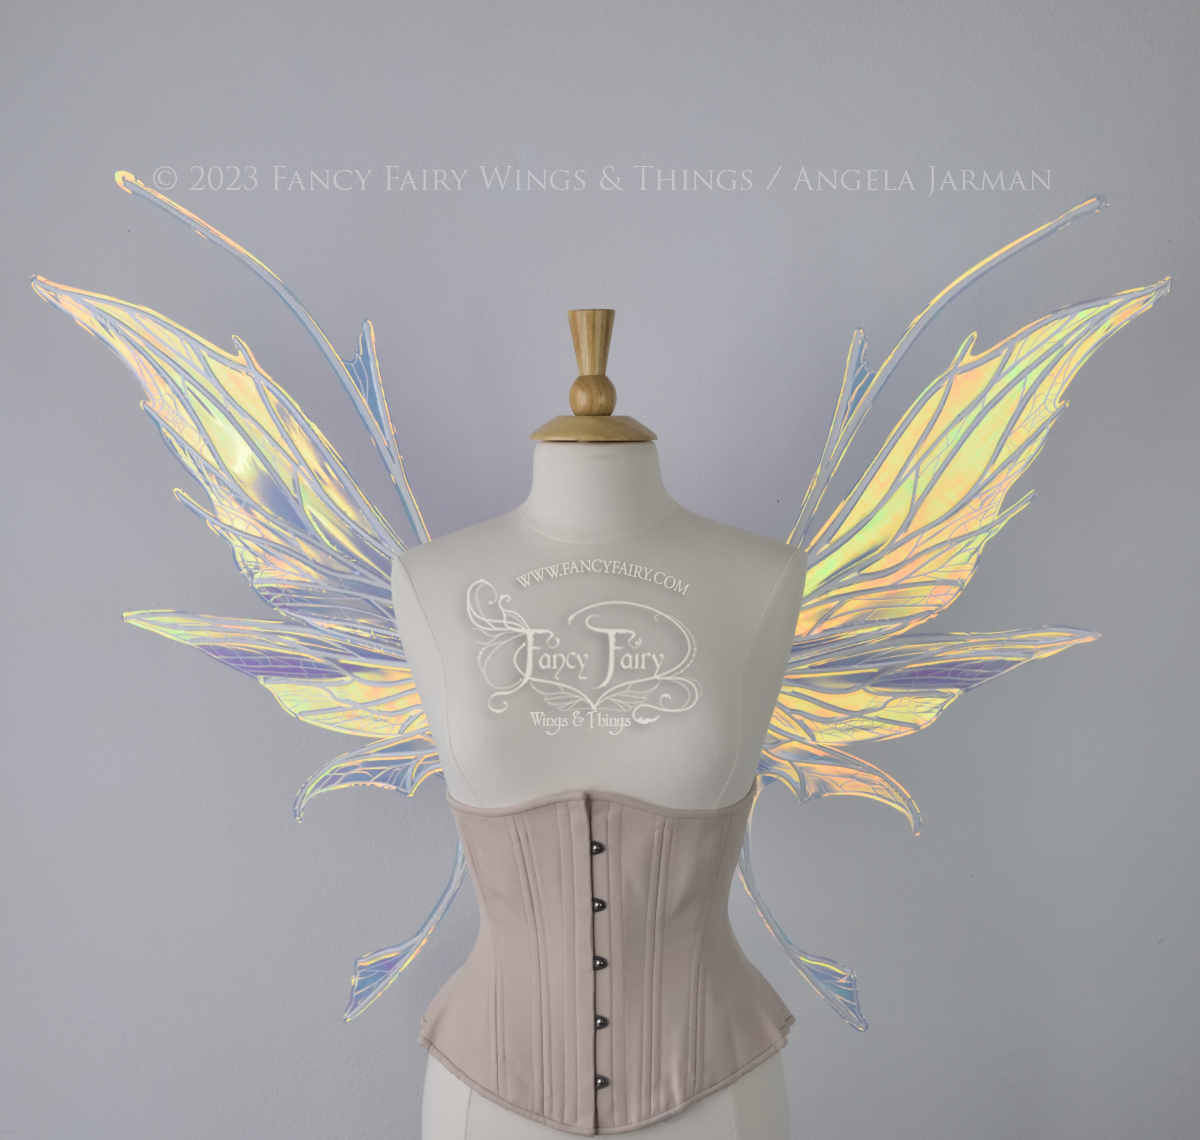  Front view of an ivory dress form wearing an alabaster underbust corset and large multicolor iridescent fairy wings featuring antennae along the top. Upper panels come to a point as do the middle panels, bottom panels have tails. Spikey, detailed wh